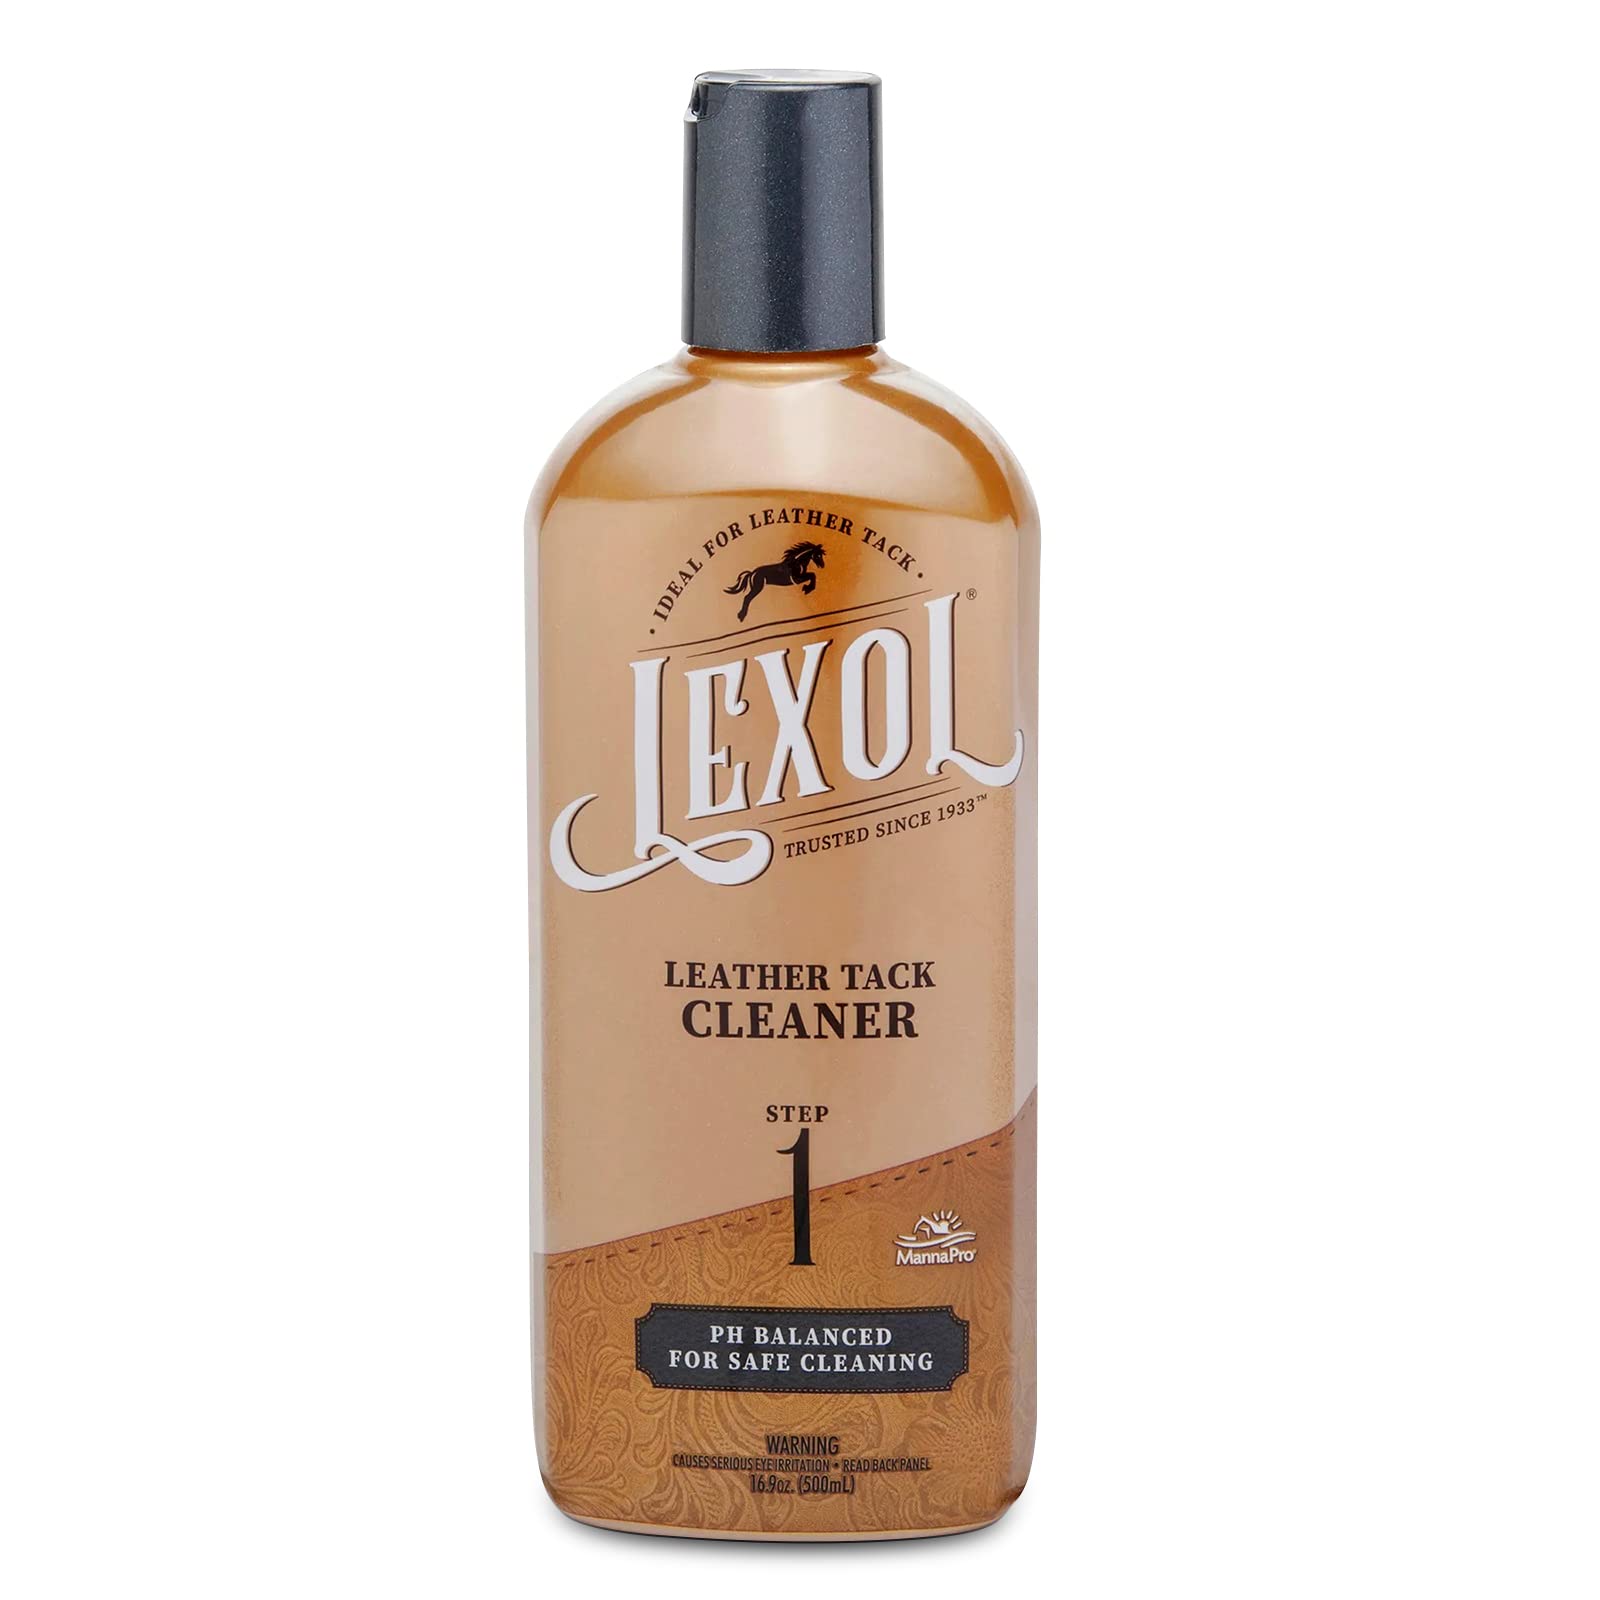 Lexol PH Leather Cleaner-Perfect Leather Care for Furniture, Handbags, Car, Shoes-Effective Leather Cleaner For Furniture-Automotive Interior Cleaner- Comes with Premium Quality Gloves-16.9oz